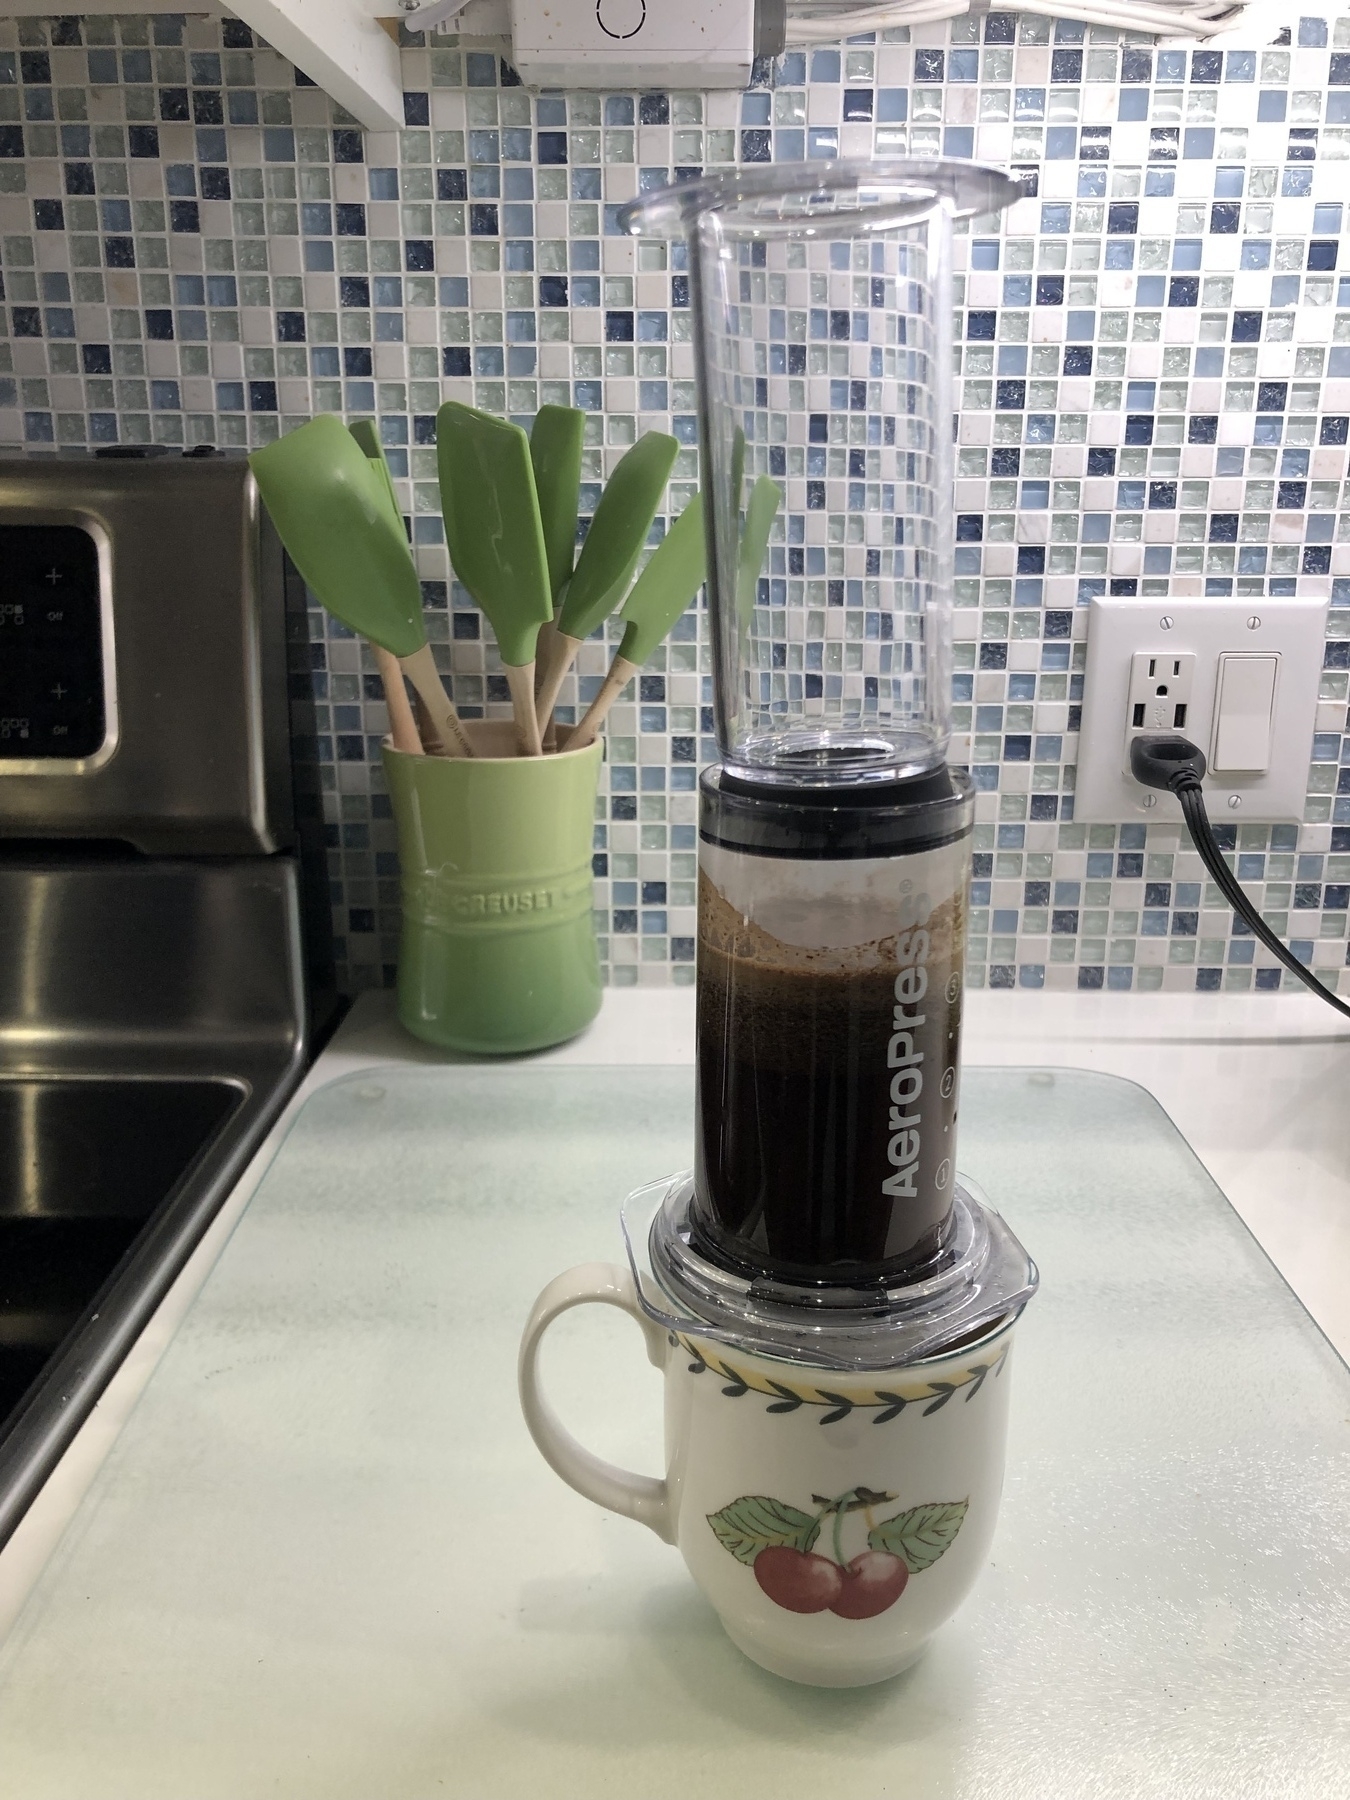 An AeroPress filled with brewing coffee on a kitchen counter